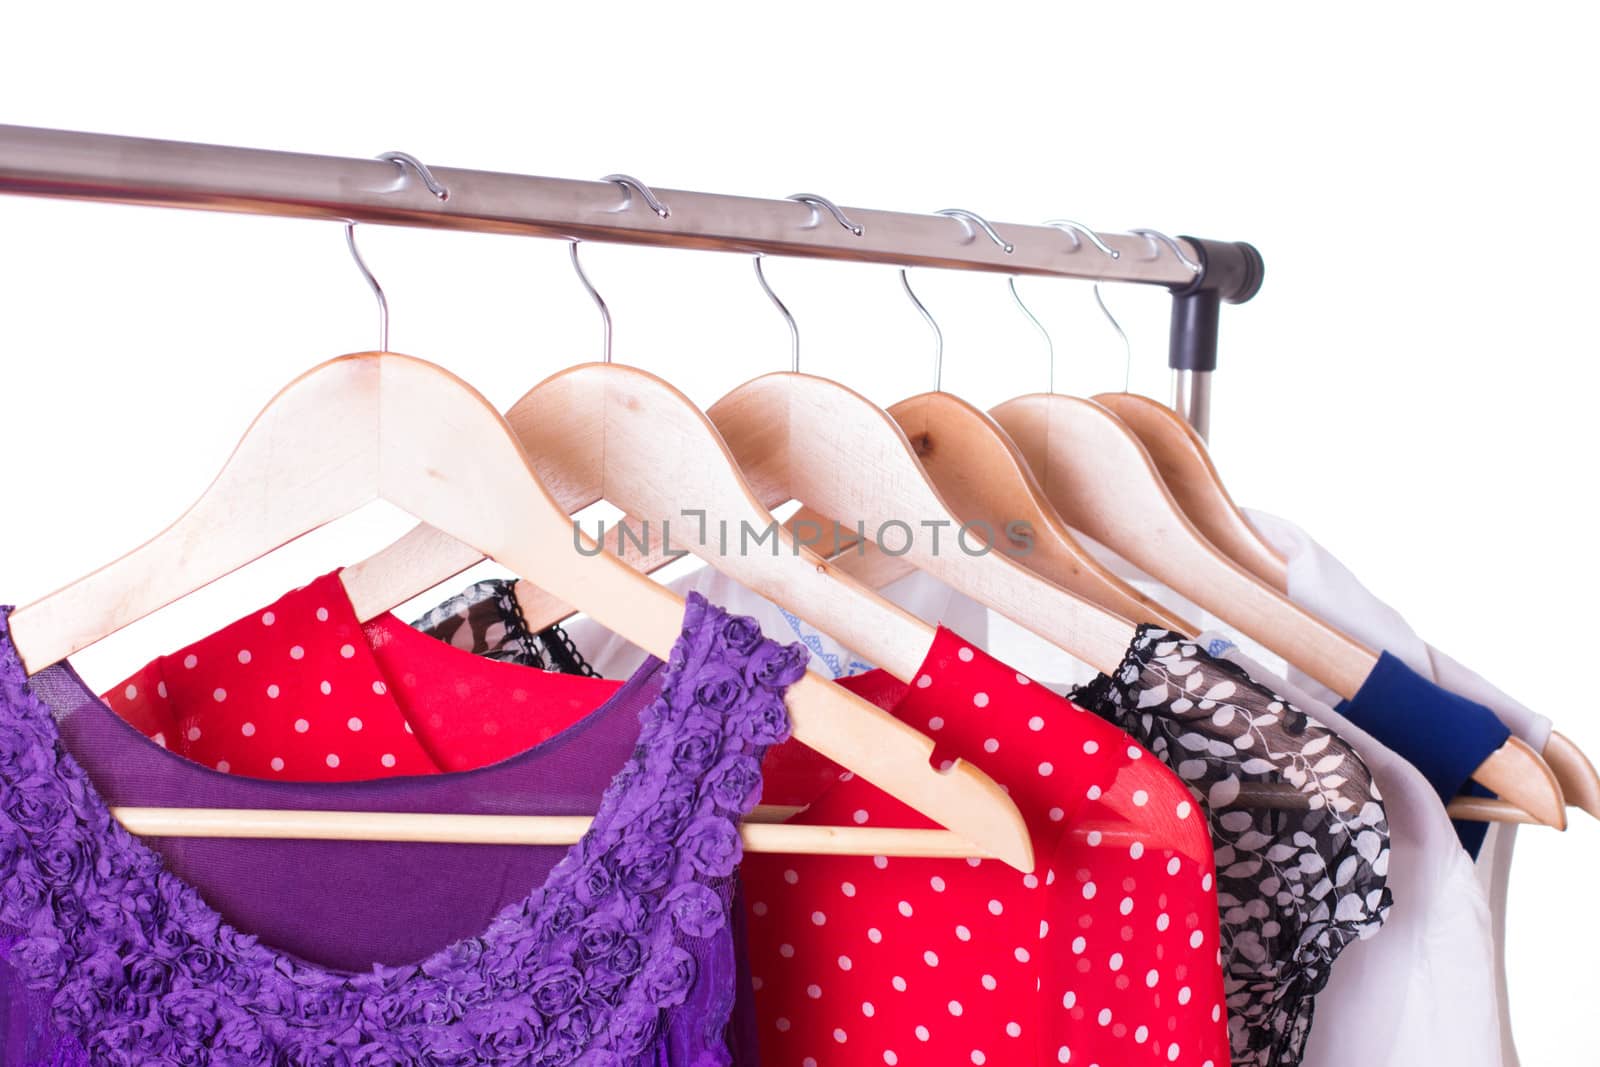 Dresses of different colors on wooden hangers over white